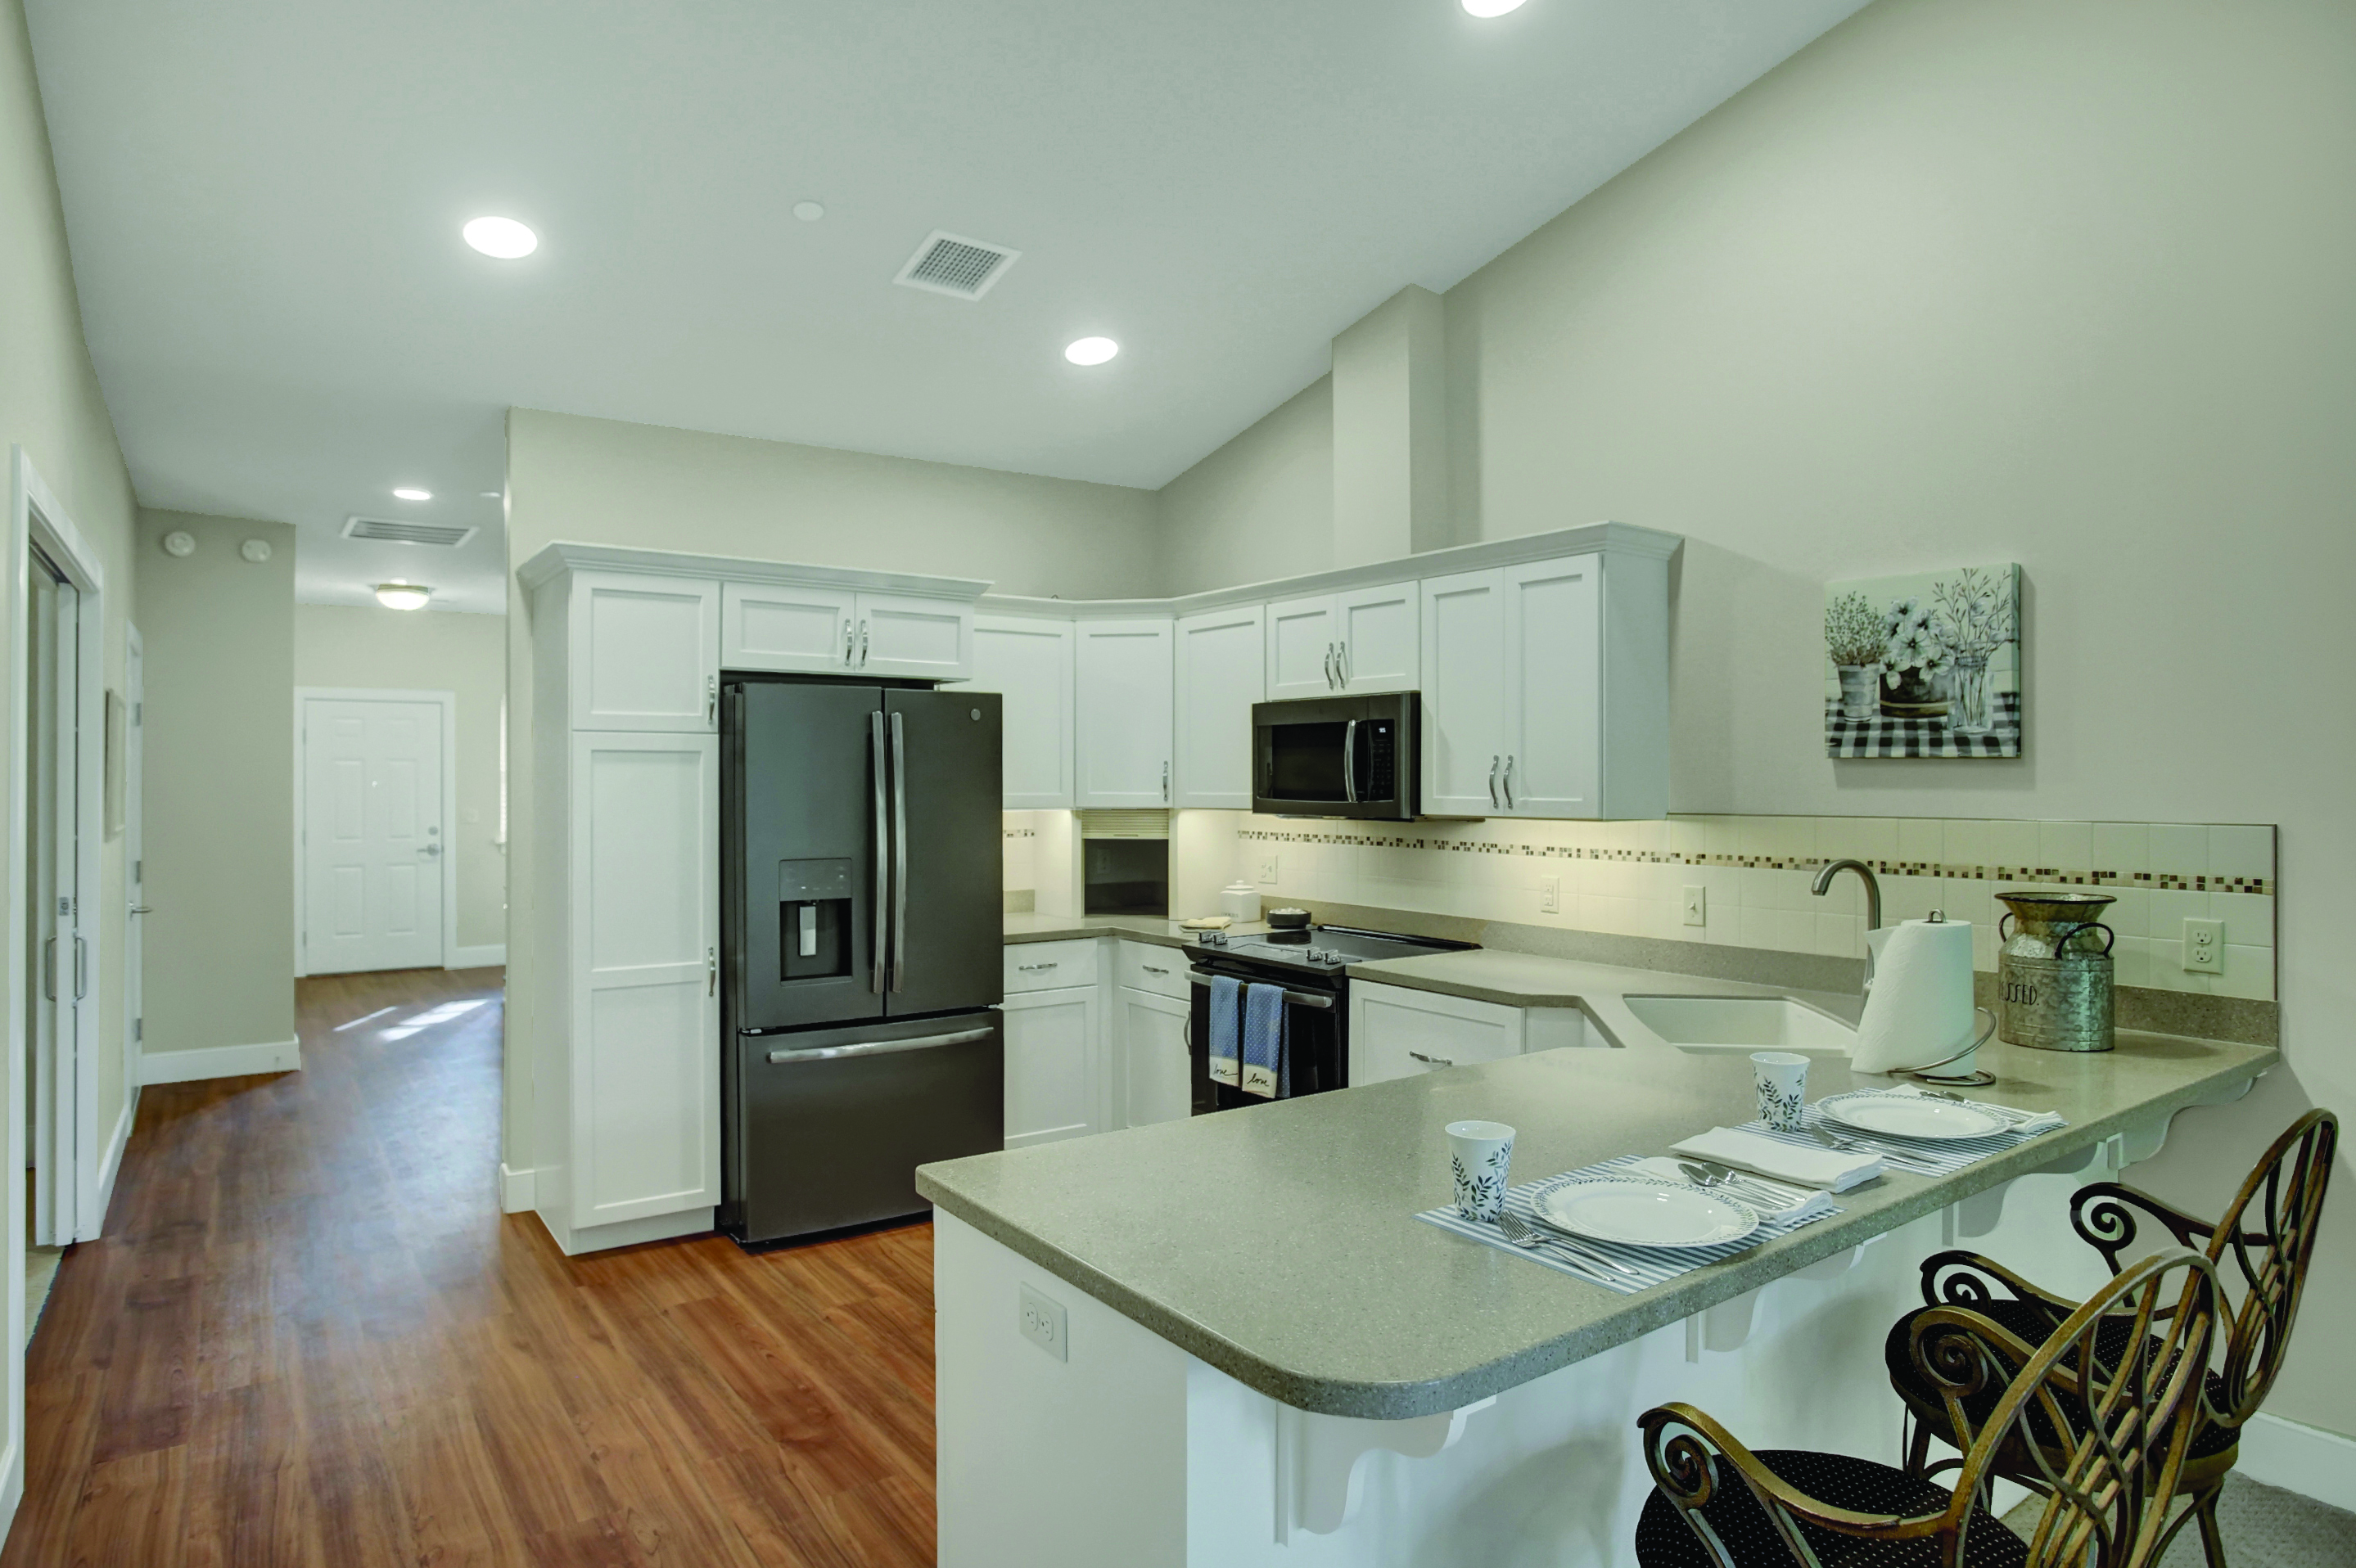 Pointe Place townhome kitchen